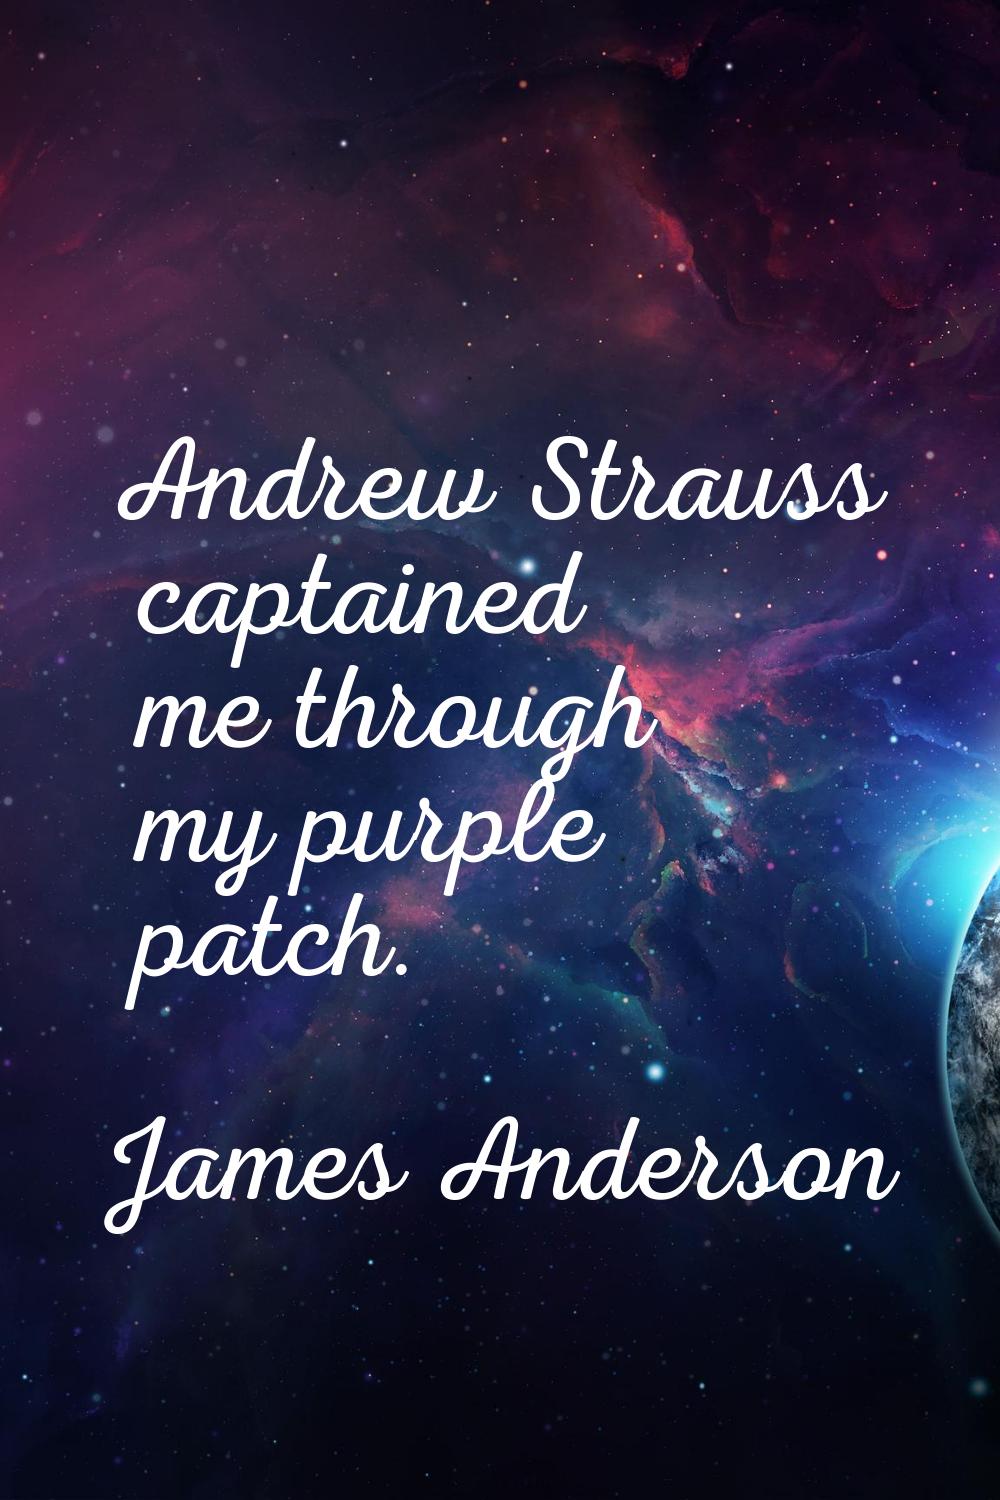 Andrew Strauss captained me through my purple patch.